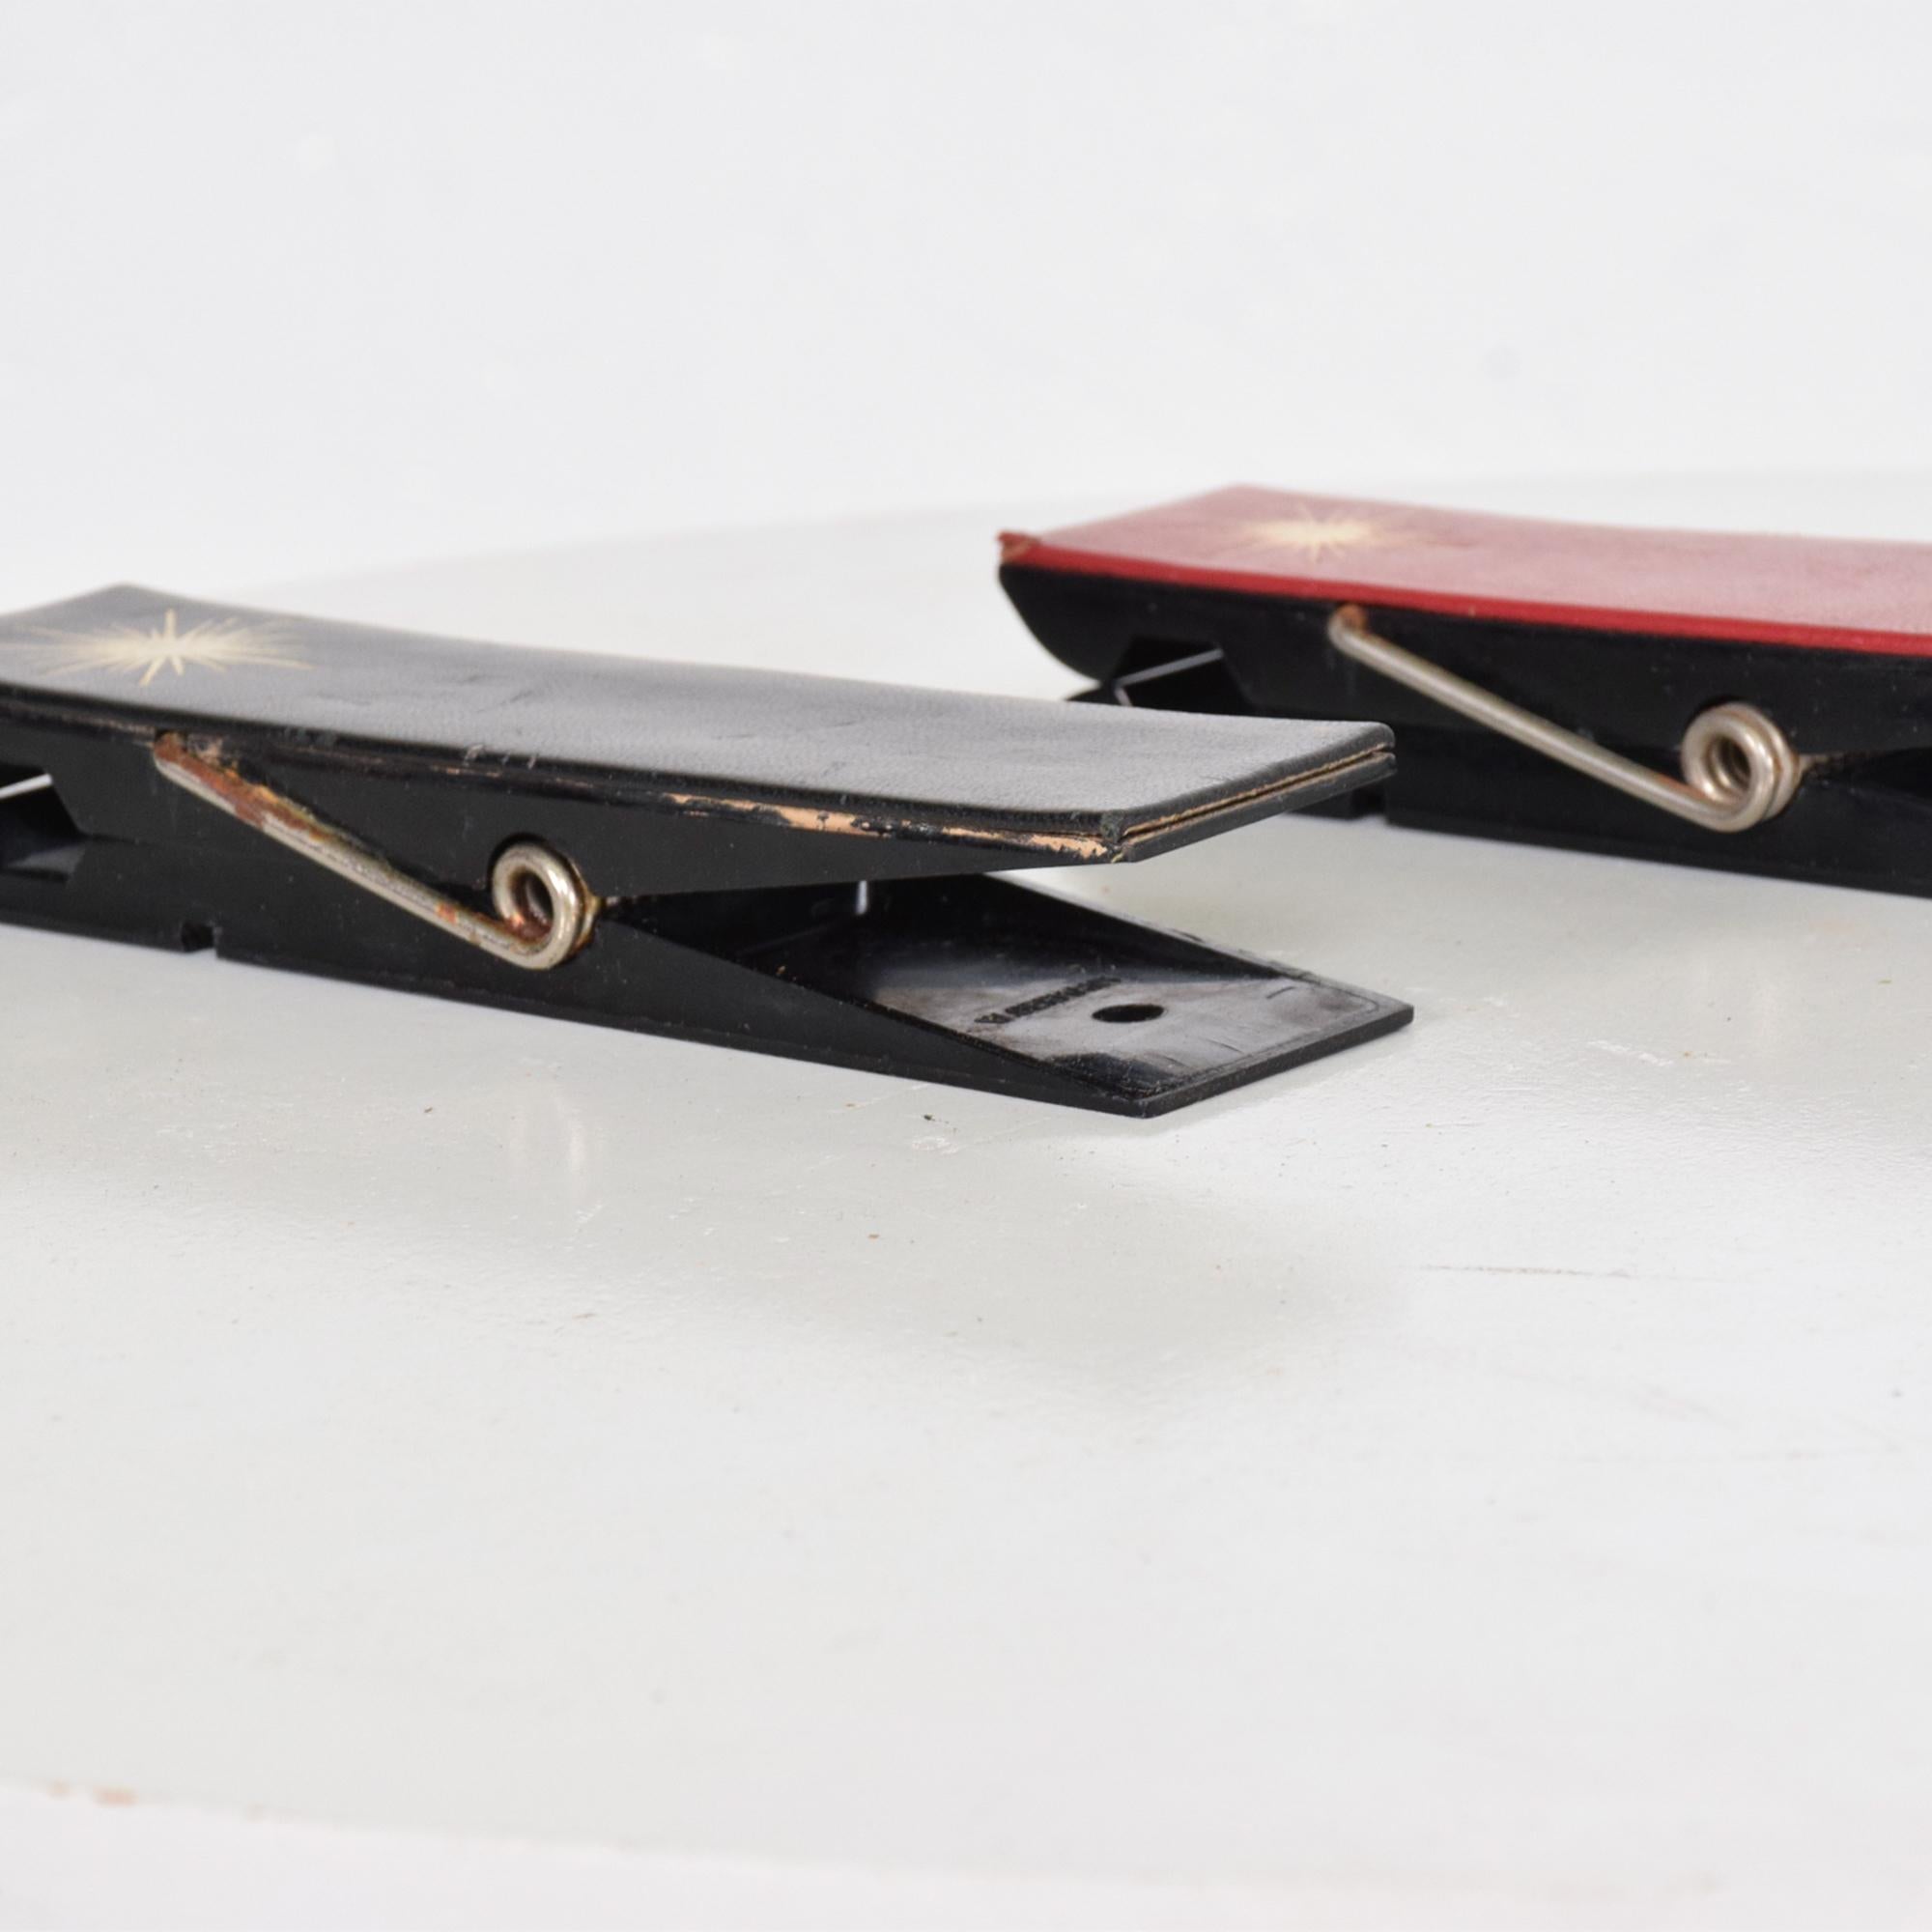 Pop art midcentury oversized paper memo clips clothespins in leather and plastic.
Red and black selling as a pair.
Germany 1950s. In the manner of Carl Auböck design.
Measures: 1